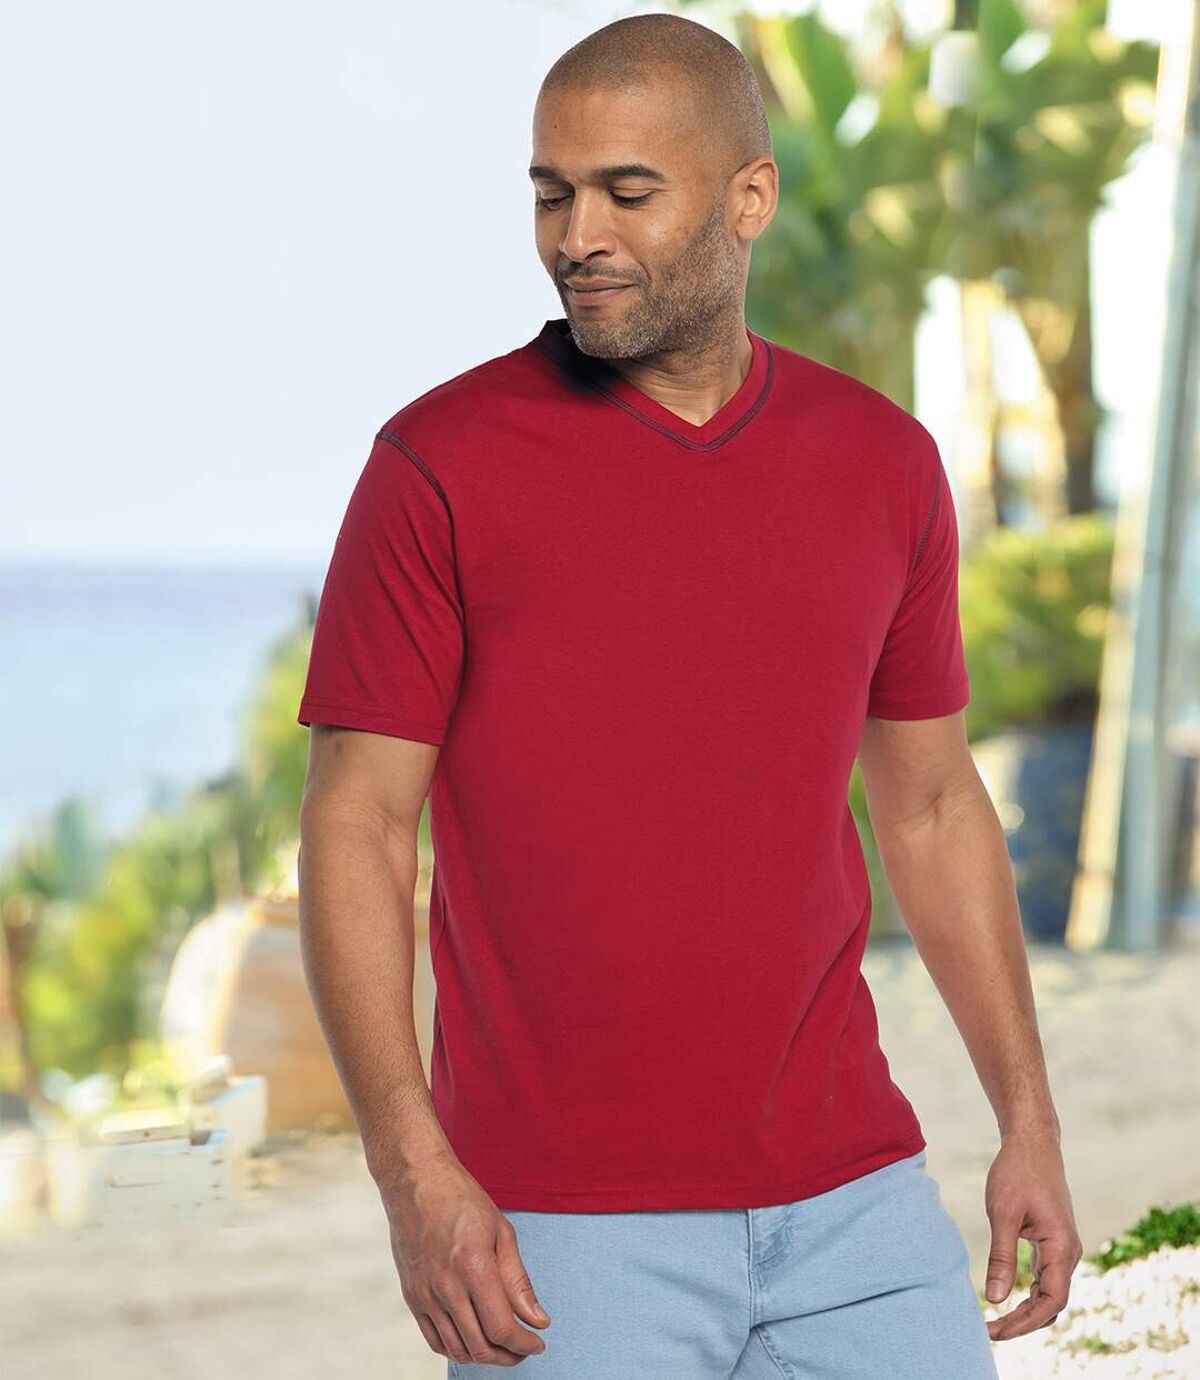 Pack of 3 Men's V-Neck T-Shirts - Grey, Charcoal and Red Atlas For Men